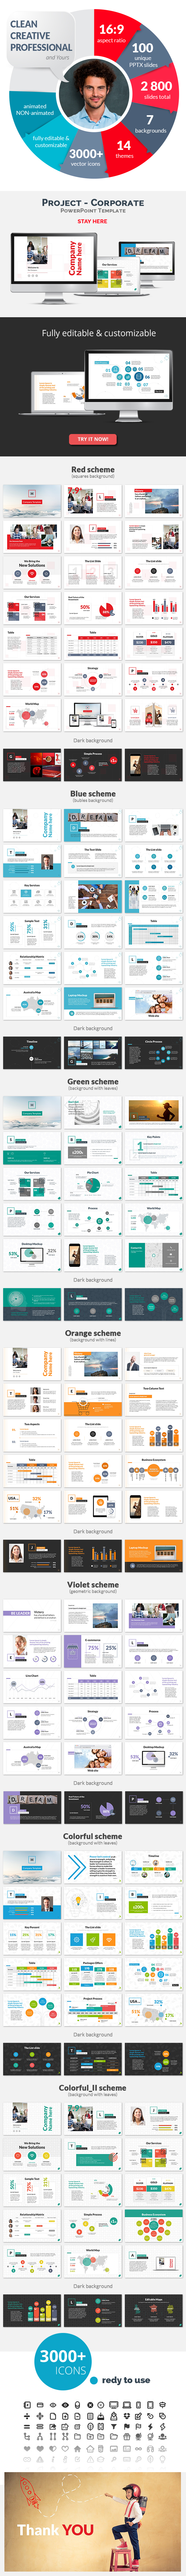 Project - Corporate PowerPoint Presentation Template